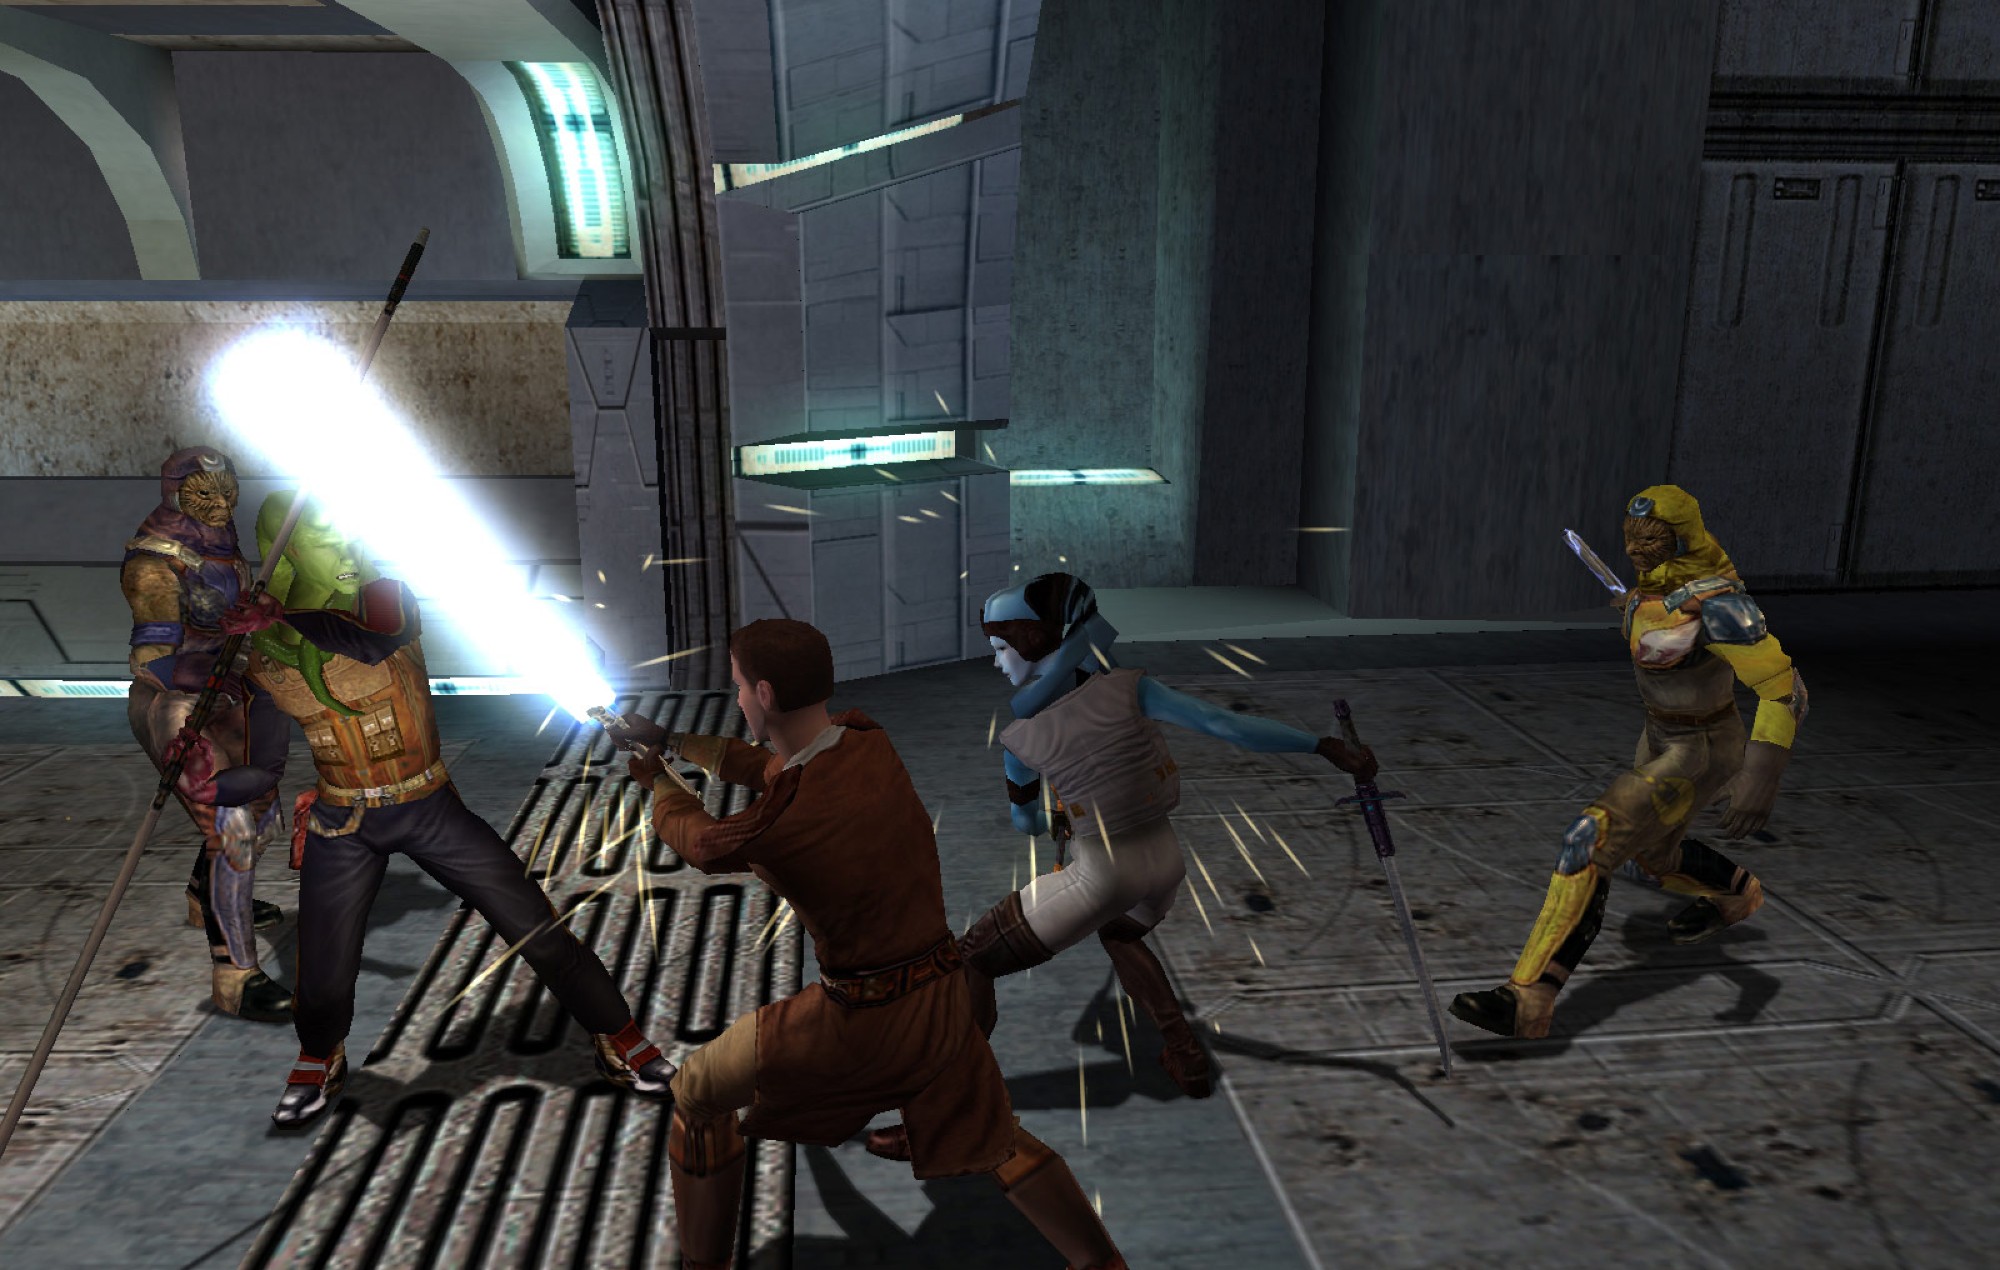 Knights Of The Old Republic (Credit: Bioware)